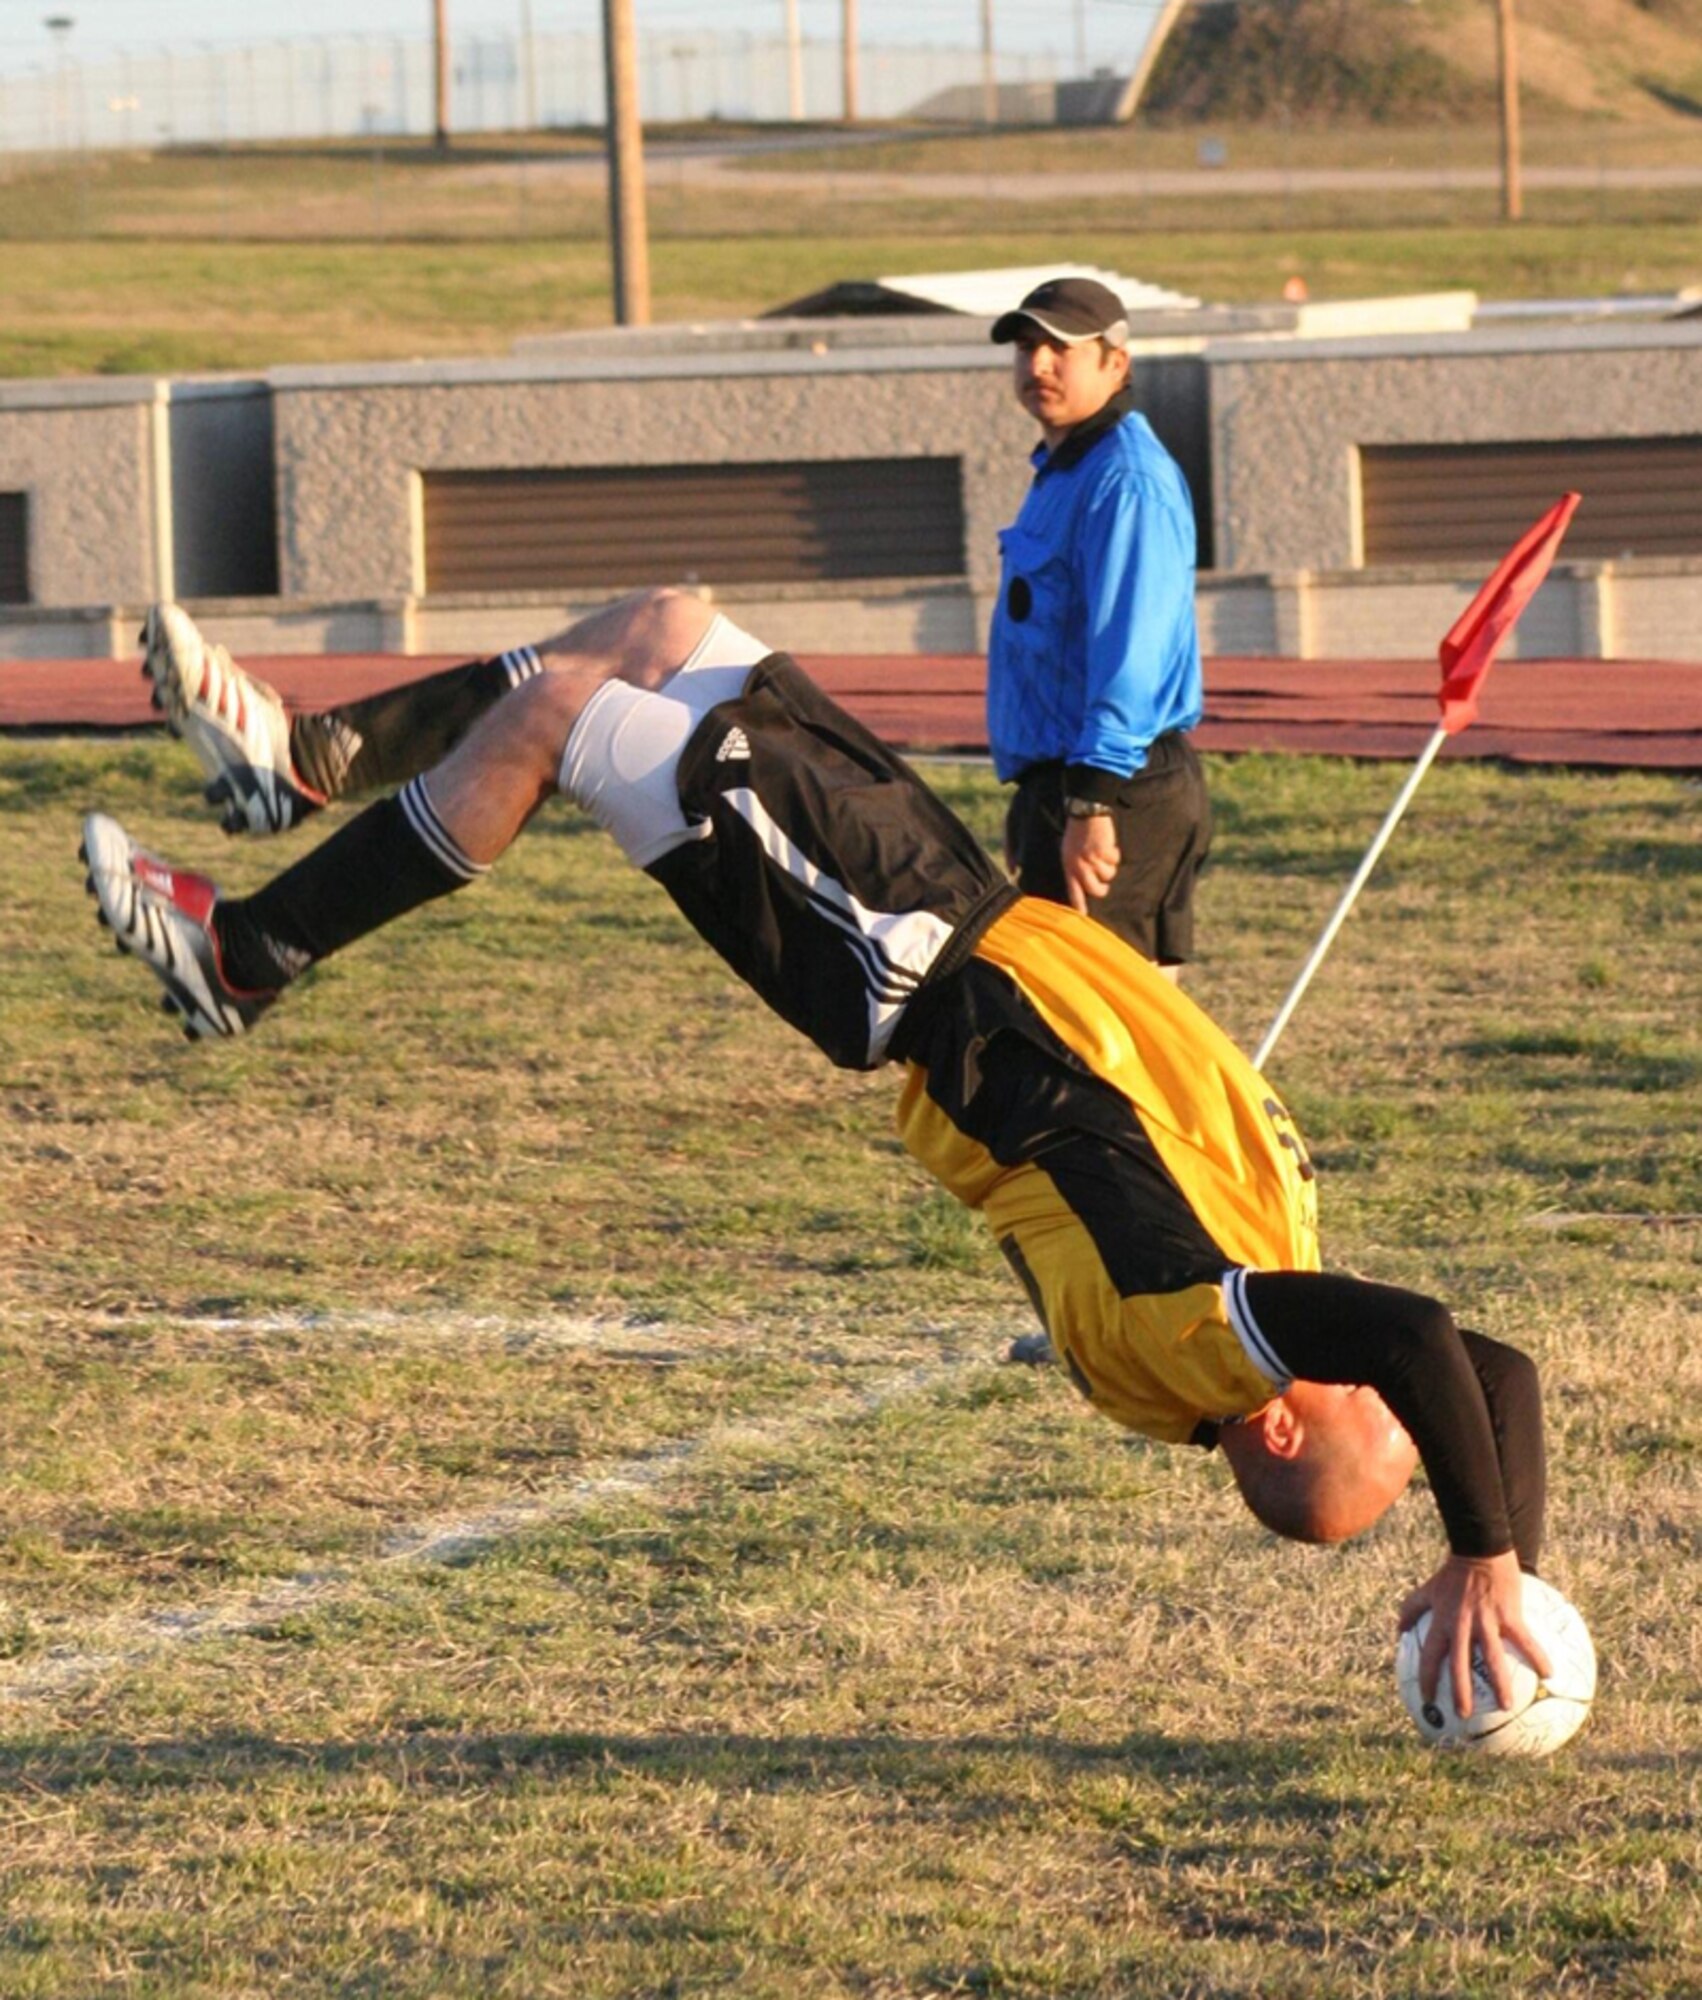 Zakary Fowkes, 373rd Training Squadron, Detachment 7, does a flip throw into the goal at the Annual Defenders Cup. (Courtesy photo)